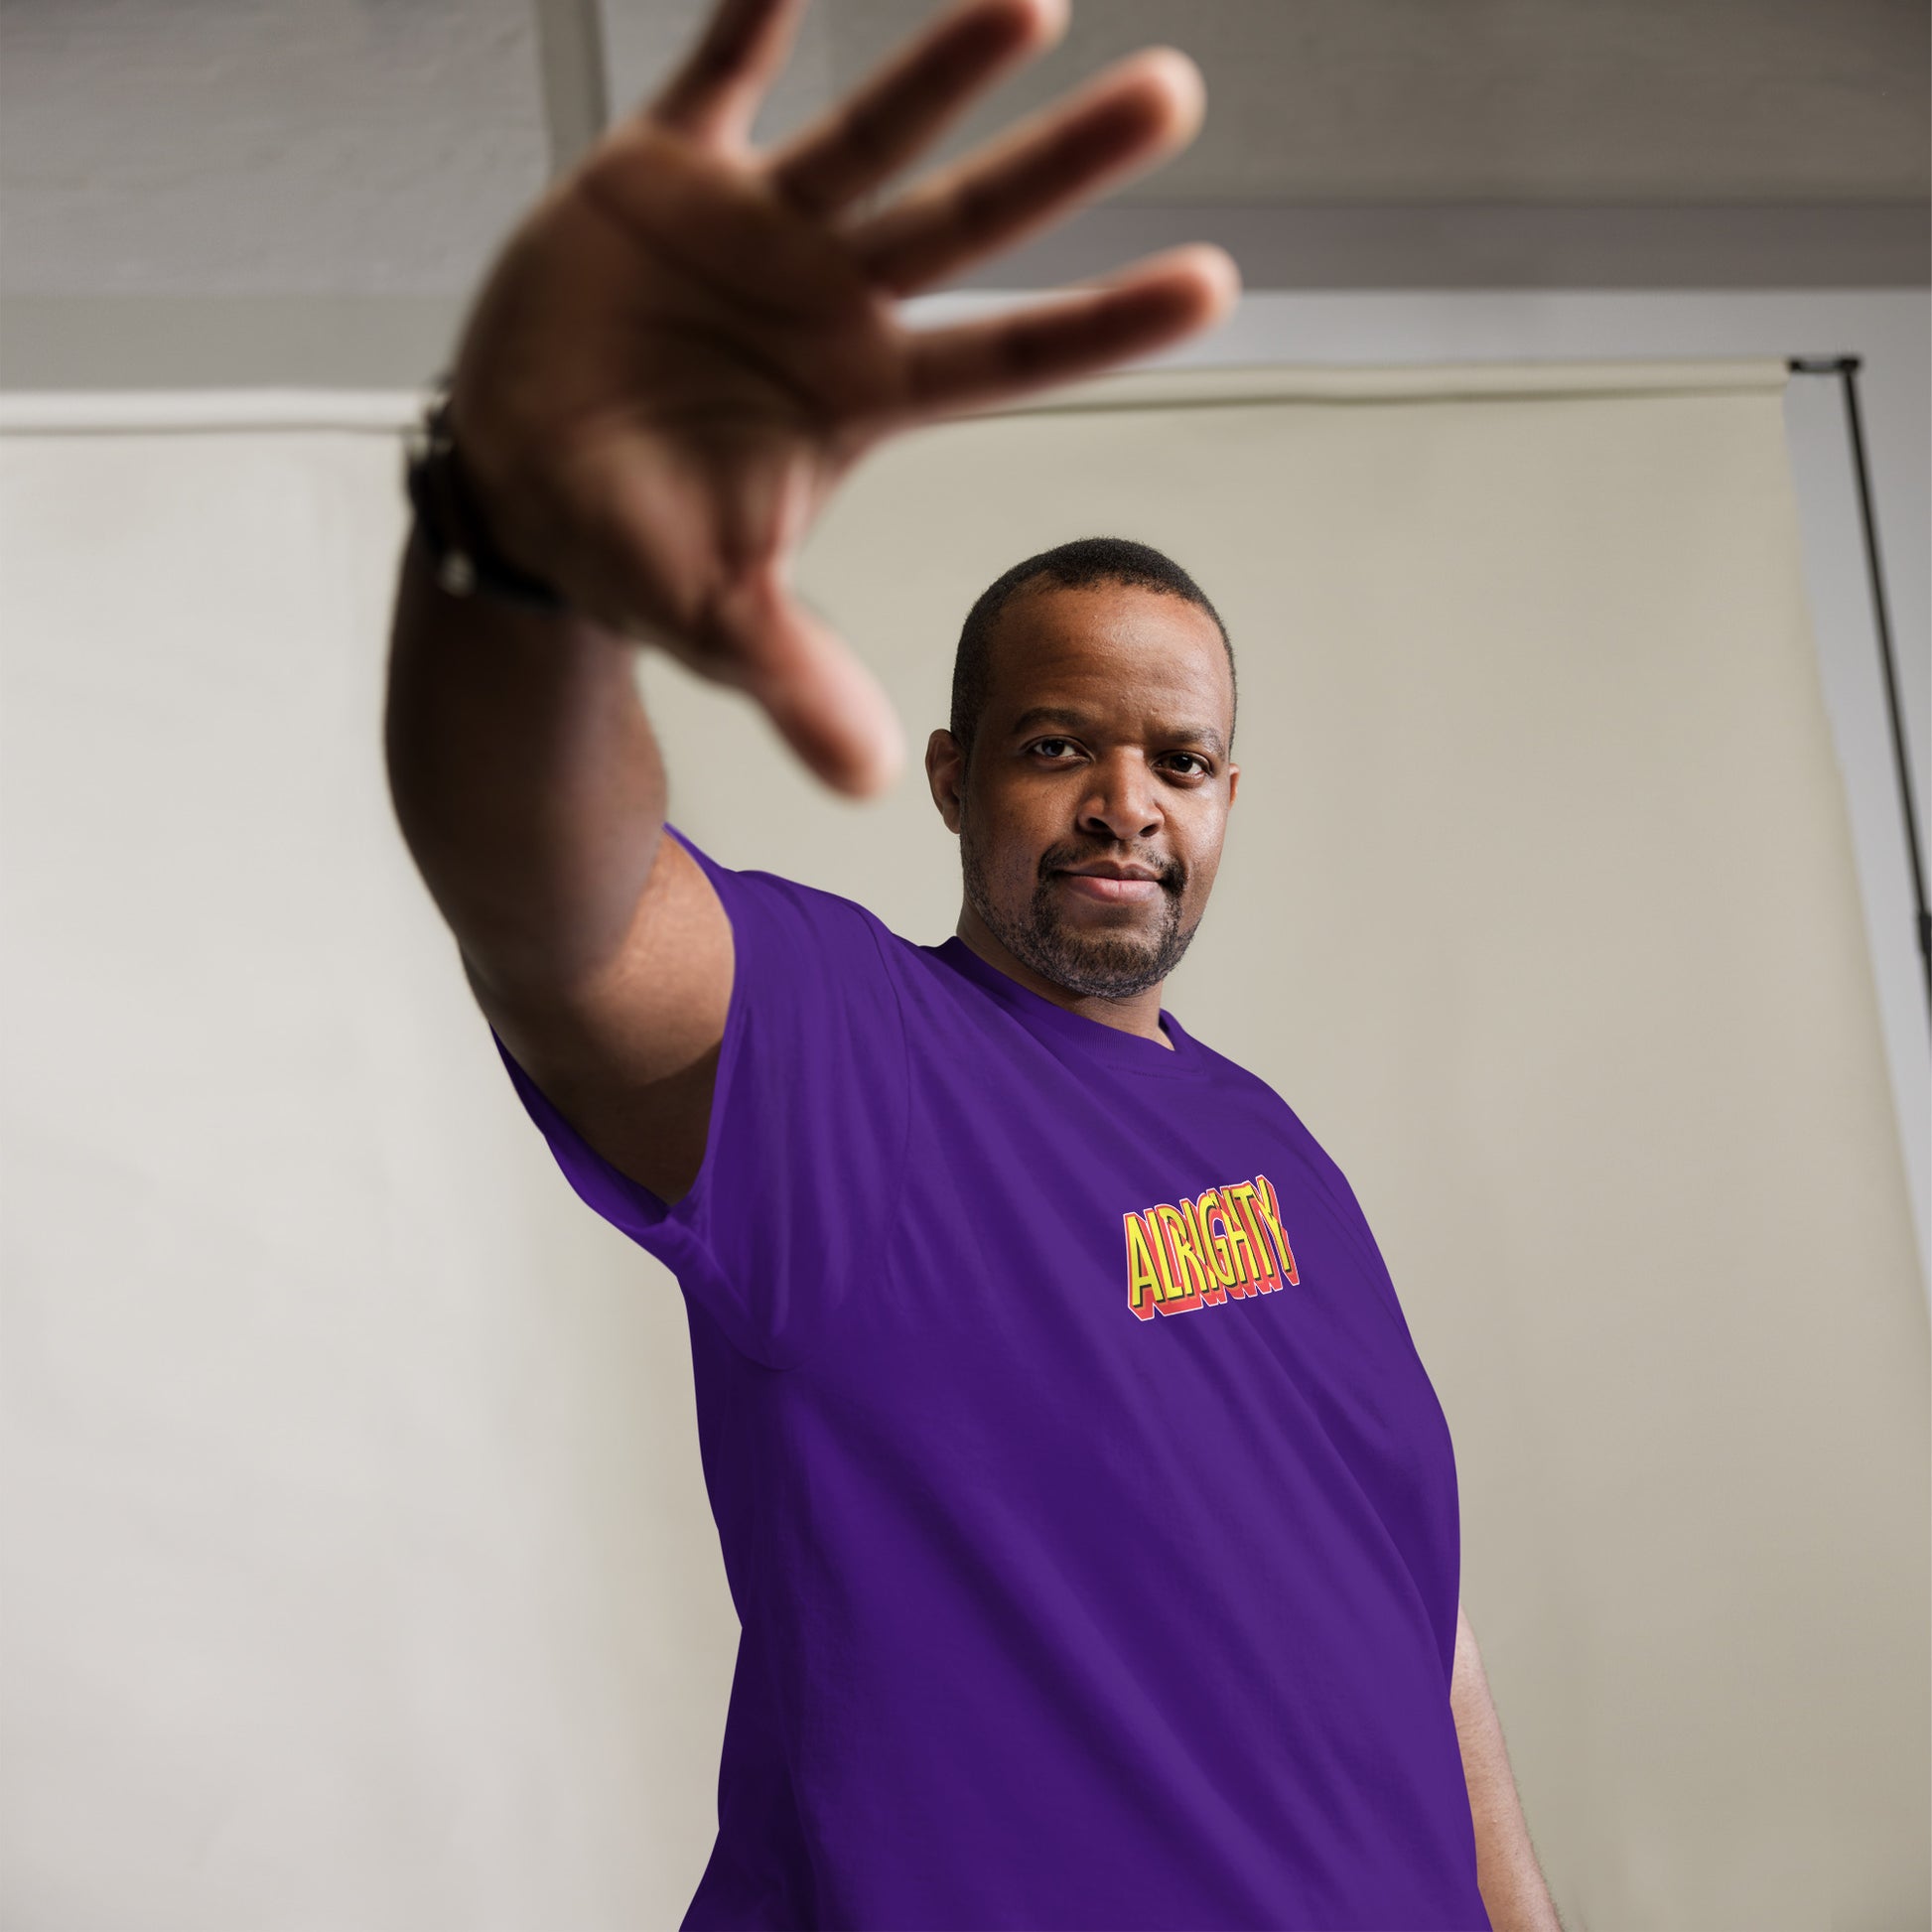 Man extending his hand towards the camera with a firm expression, wearing a vibrant purple t-shirt emblazoned with the word 'ALRIGHTY' in a fiery font, against a white backdrop with soft shadows.